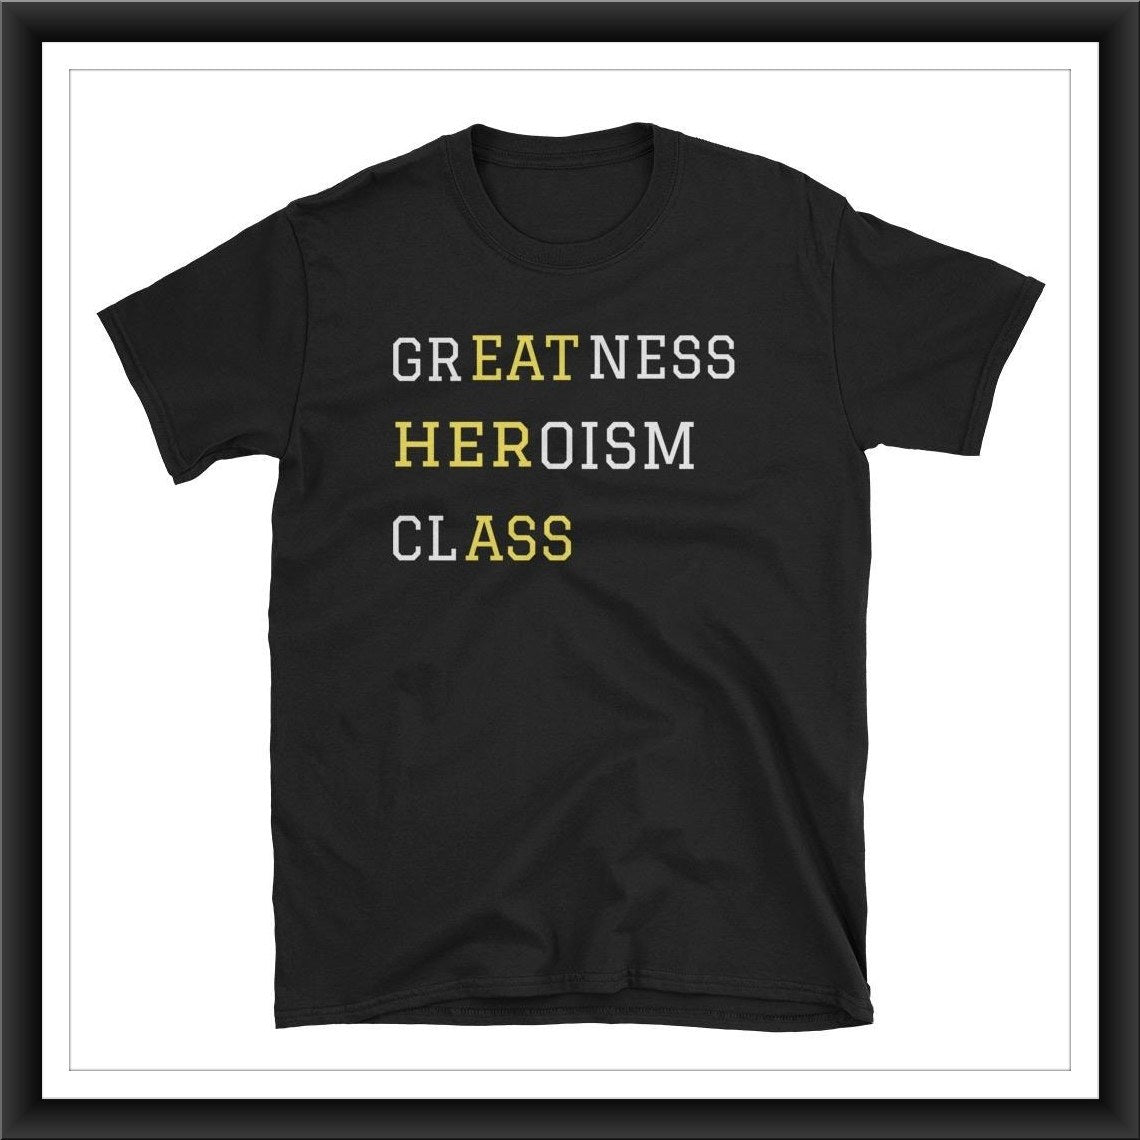 Greatness, Heroism, Class - Unisex T-Shirt | Liners Gone Wild - Shop Humor Based Apparel & Accessories